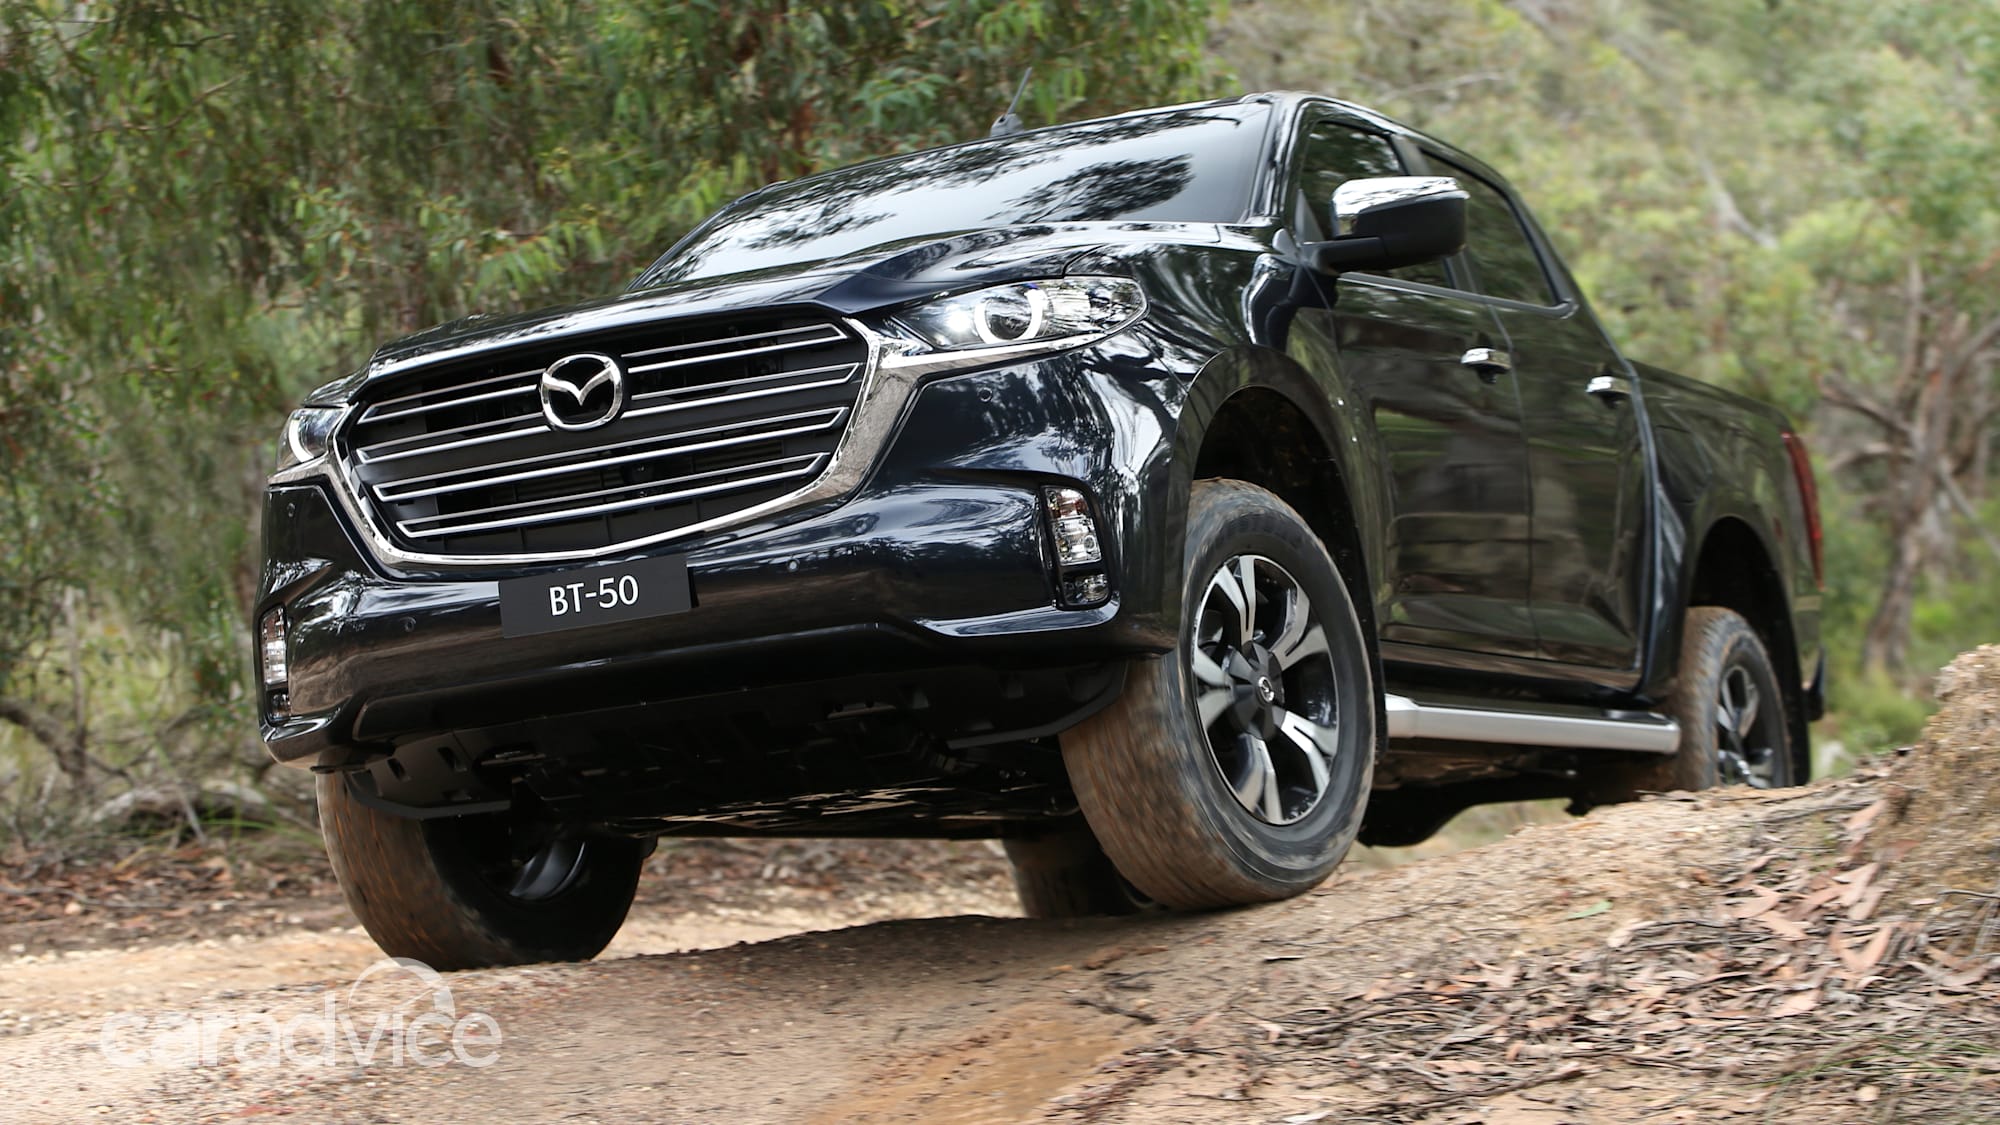 2021 Mazda BT-50 unveiled, in showrooms this year | CarAdvice